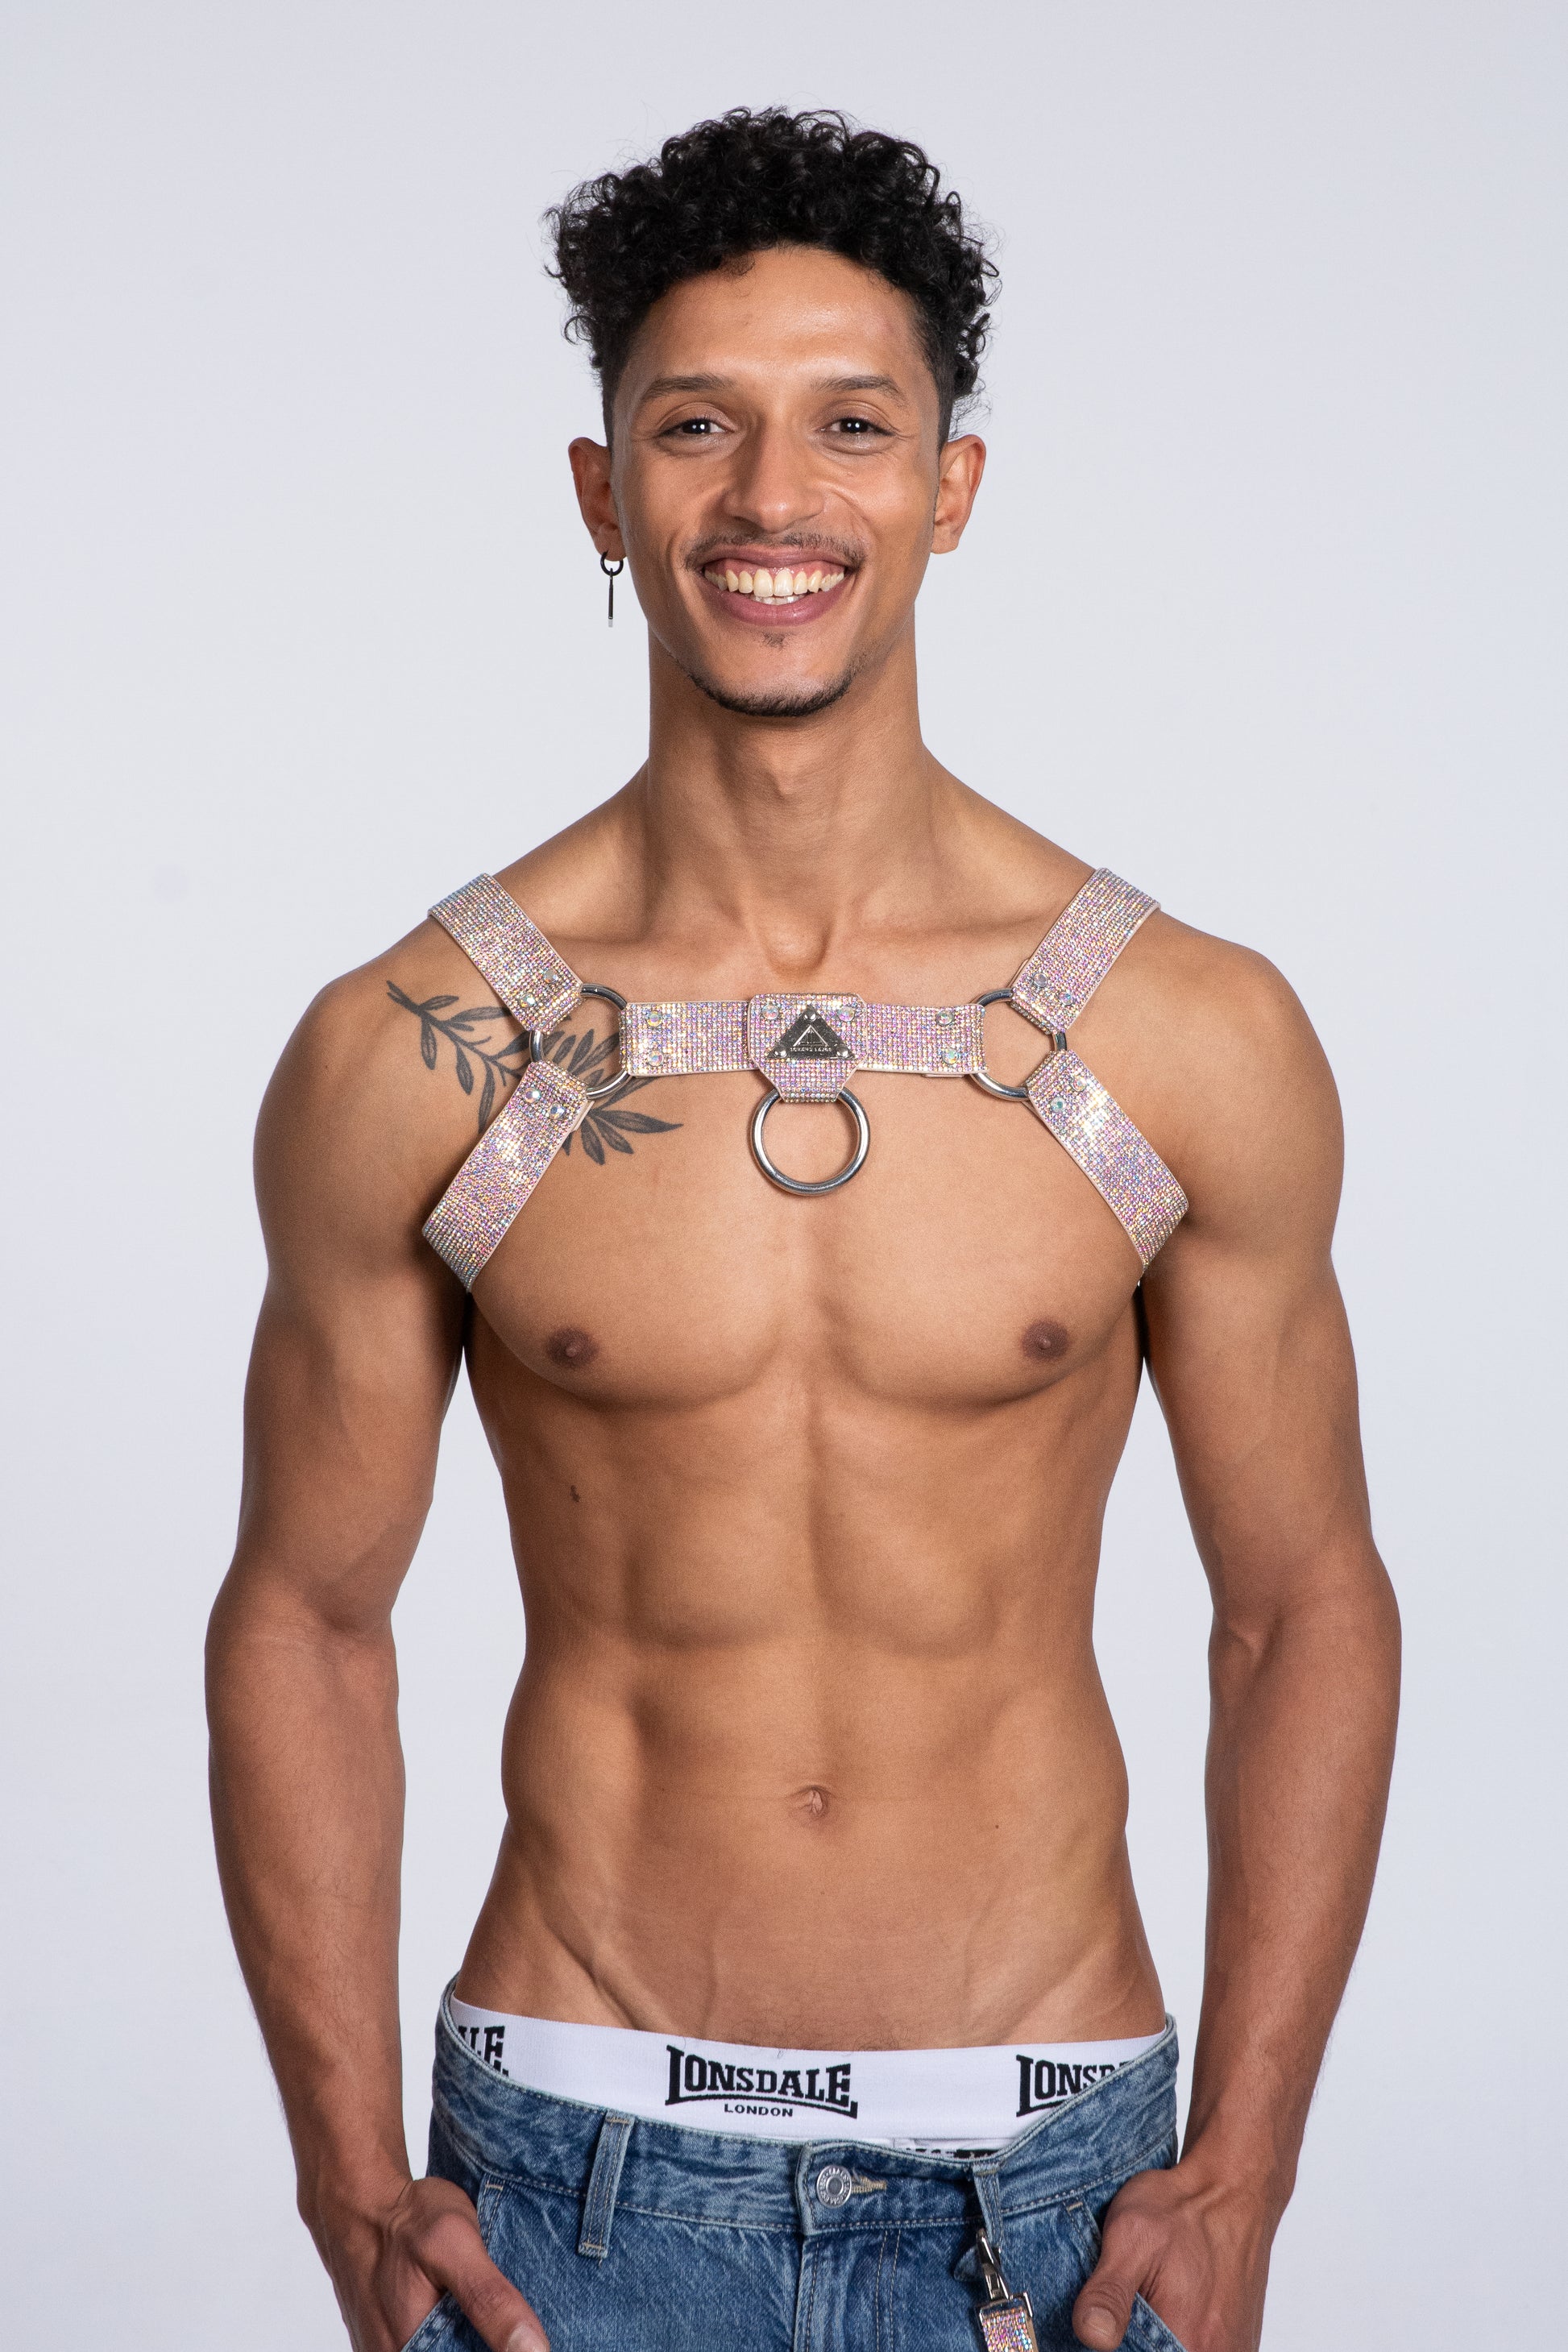 Multicolored crystal-adorned H-Harness for vibrant and stylish men at gay parties.